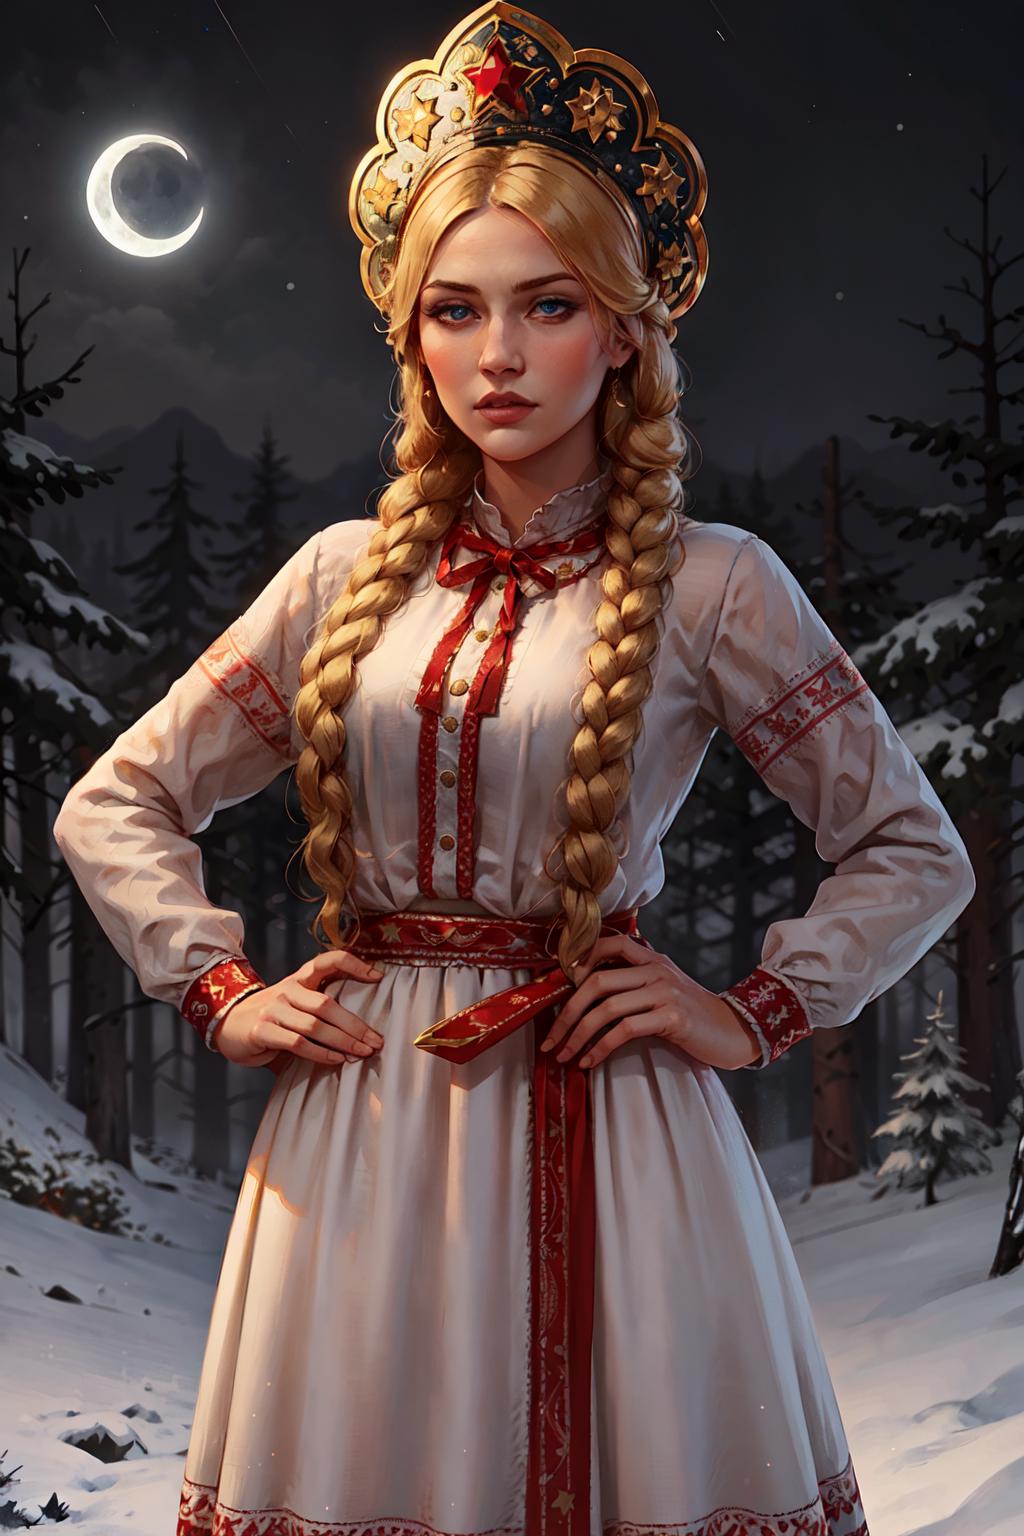 A beautiful woman with braided hair wearing a white dress and red belt in a forest.